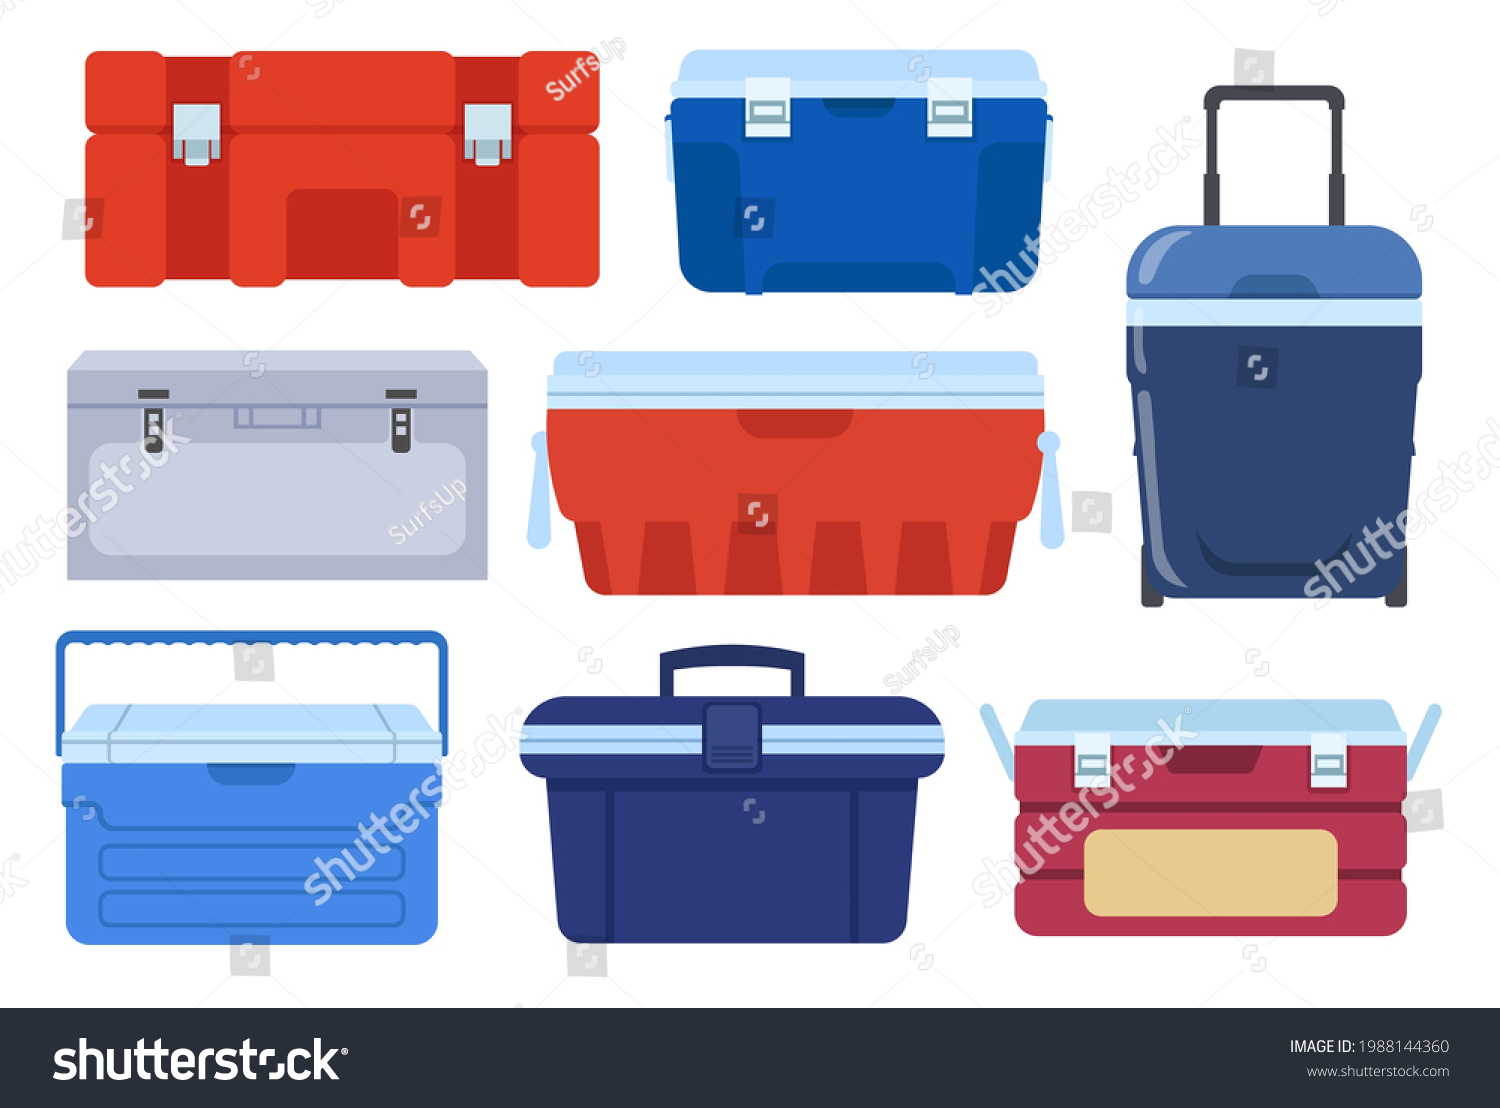 SVG of Different iceboxes vector illustrations set. Collection of ice chests or coolers for food, containers or portable refrigerators isolated on white background. Picnic, camping, food, traveling concept svg